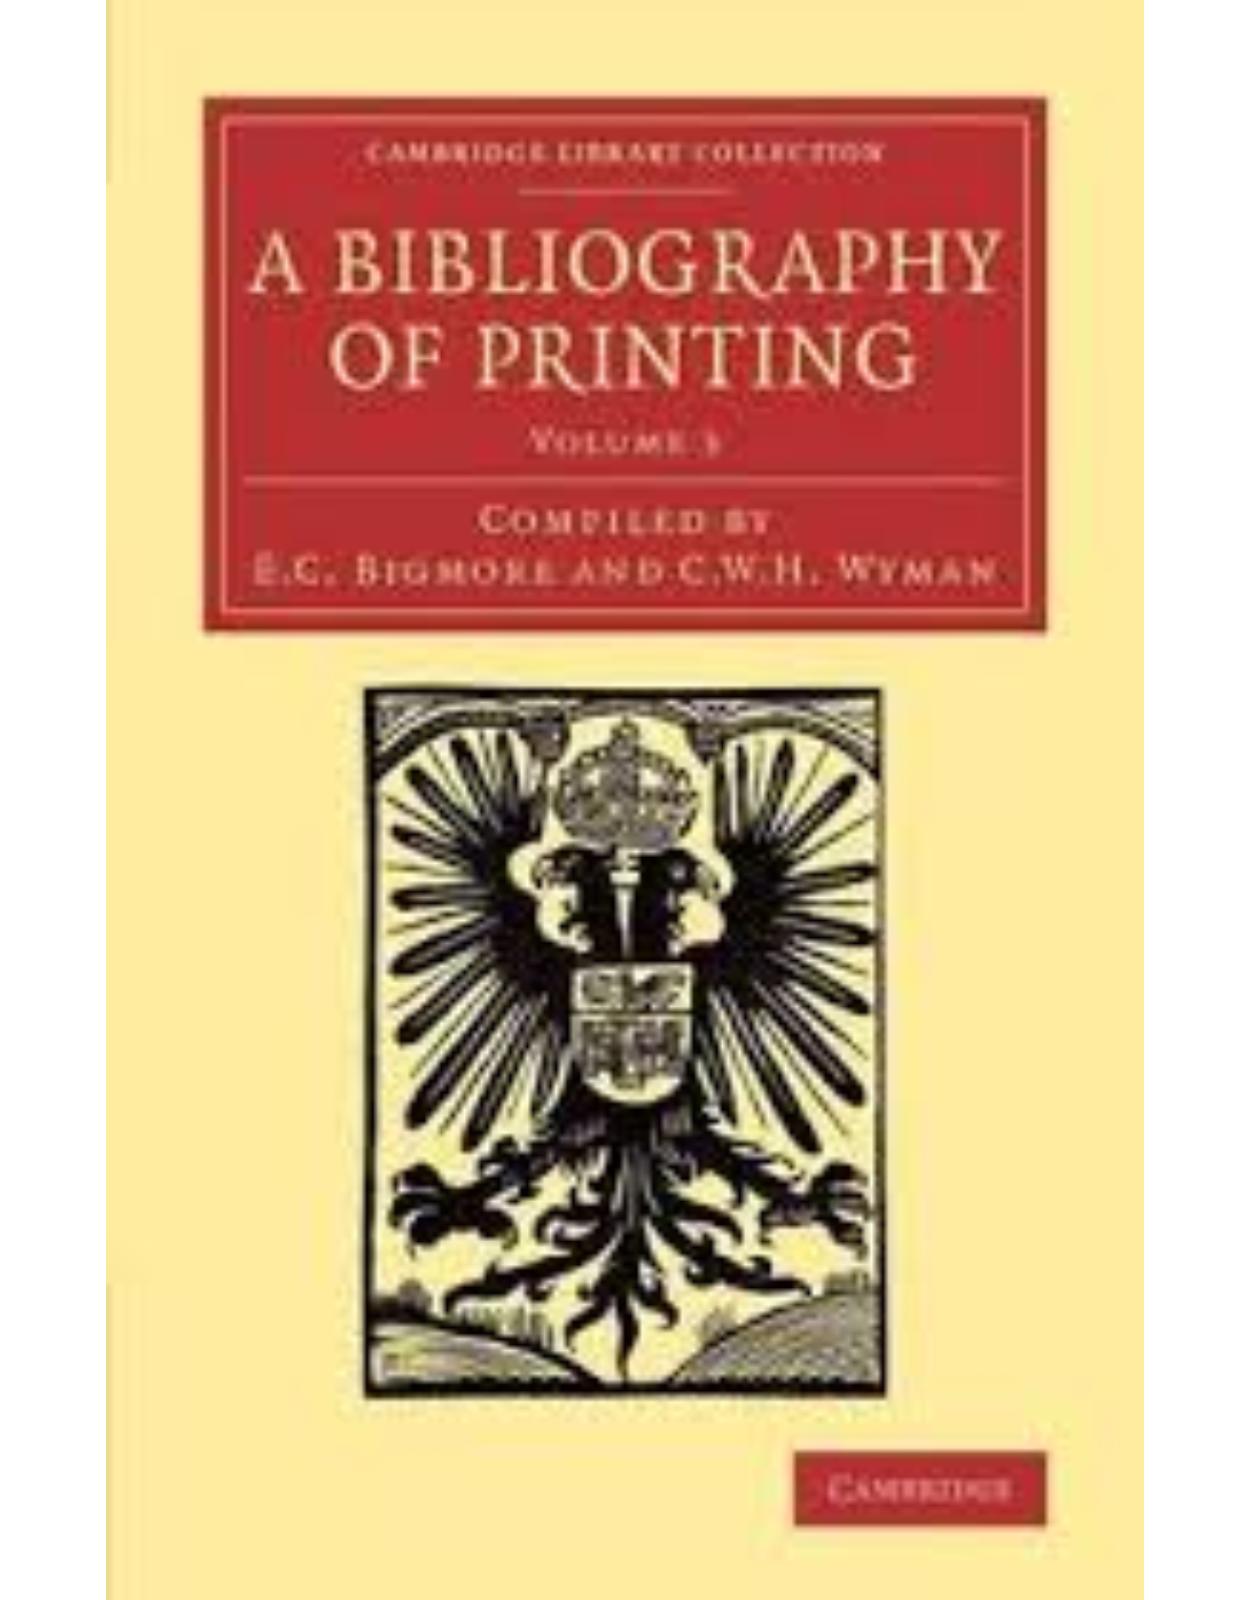 A Bibliography of Printing 3 Volume Set: A Bibliography of Printing: With Notes and Illustrations: Volume 3 (Cambridge Library Collection - History of Printing, Publishing and Libraries)